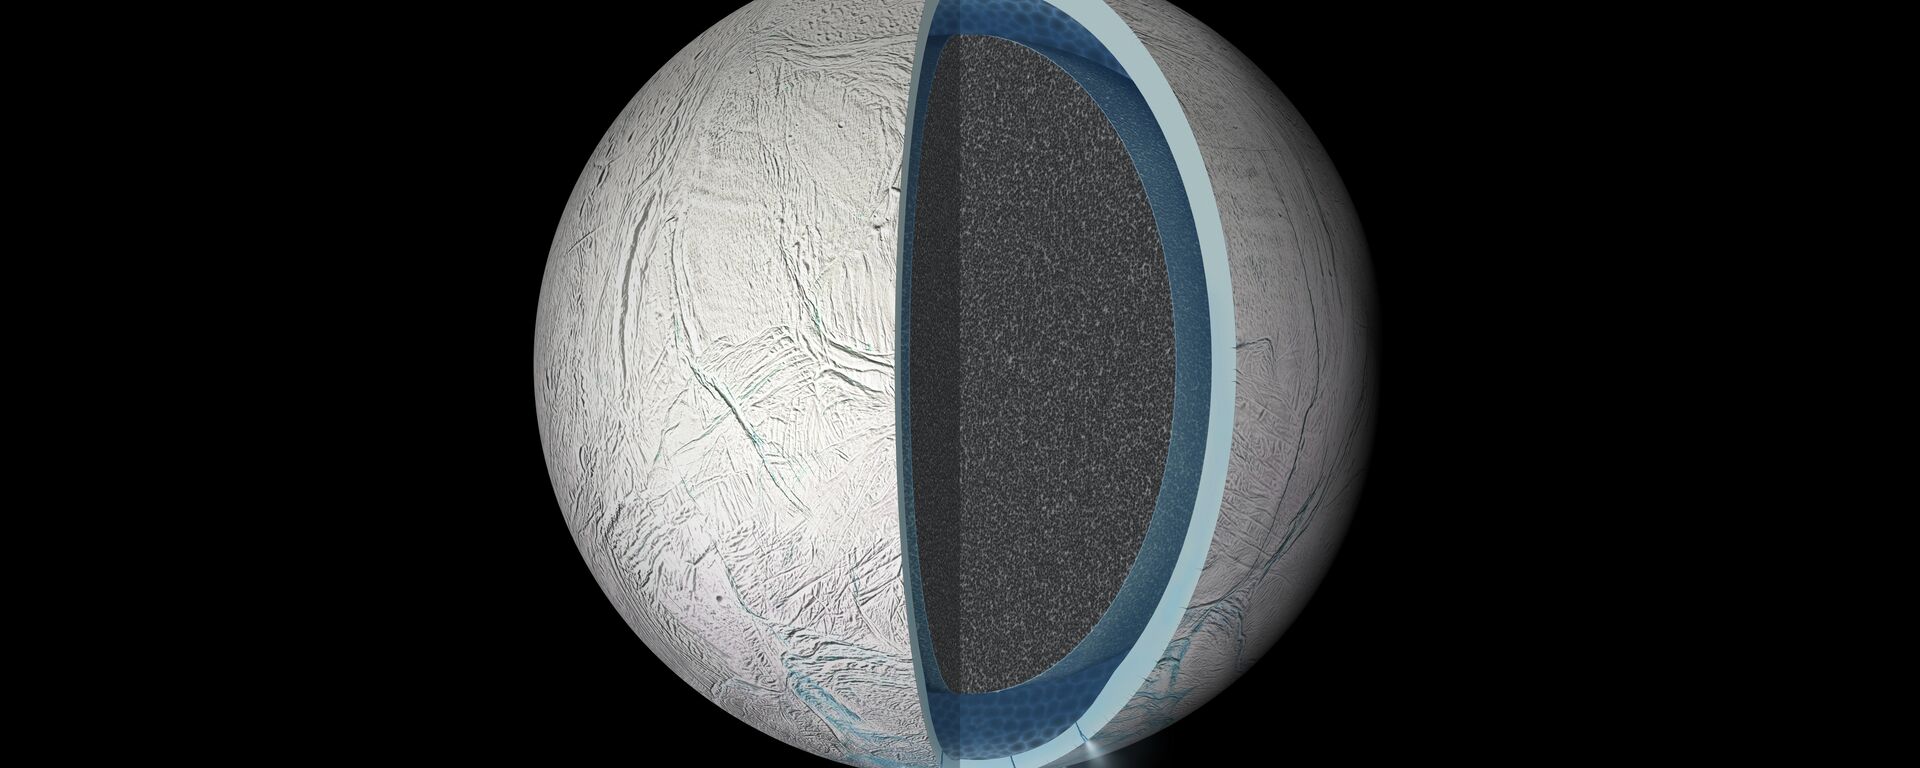 Illustration of the interior of Saturn's moon Enceladus showing a global liquid water ocean between its rocky core and icy crust. Thickness of layers shown here is not to scale. - Sputnik International, 1920, 04.01.2023